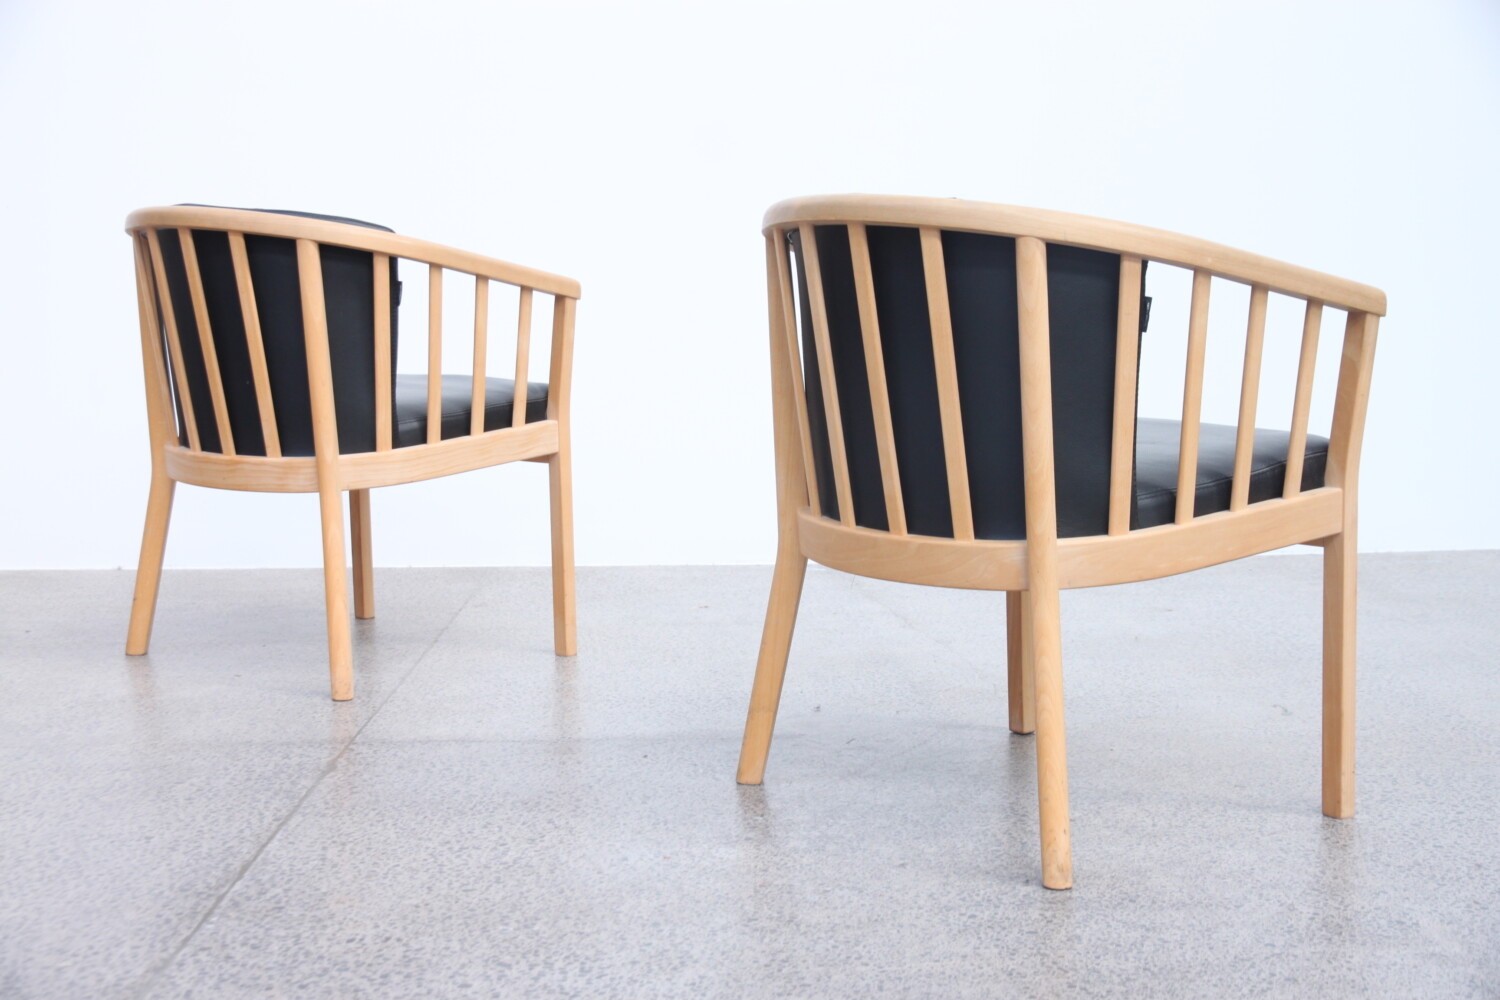 Pair of Chairs by Skalma